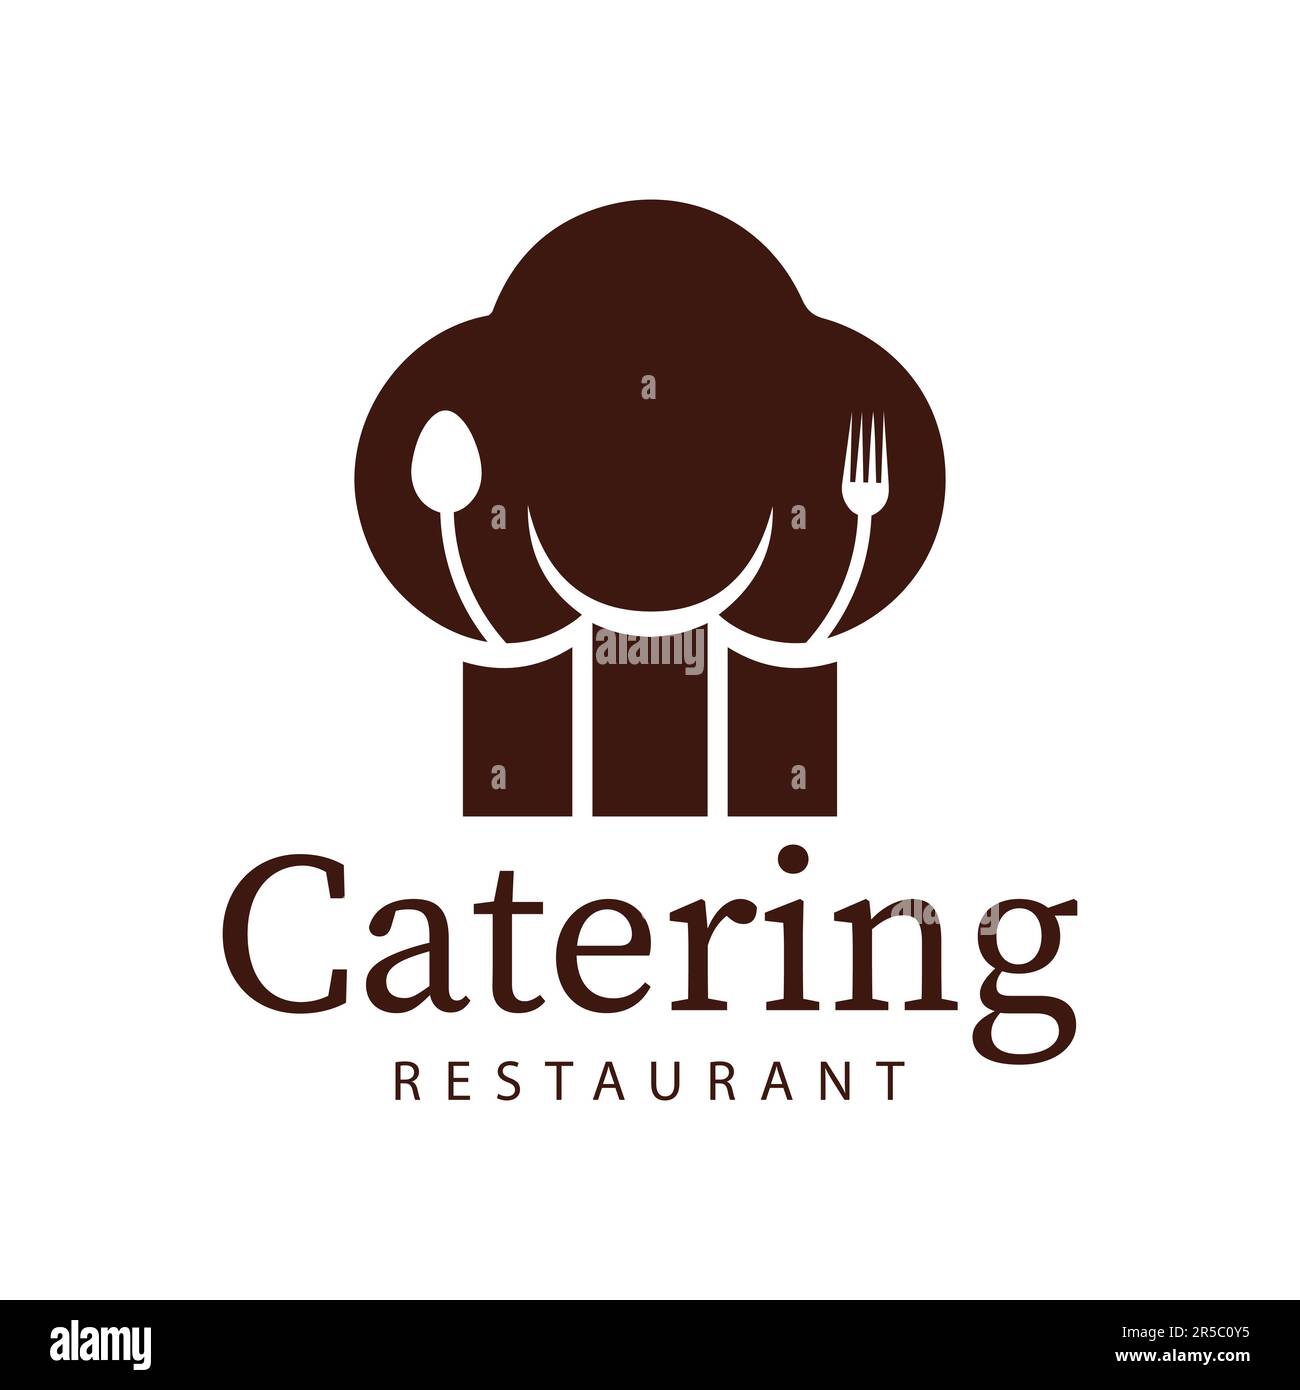 Catering Logo Design Chef Cap Fork and Spoon Logotype Stock Vector